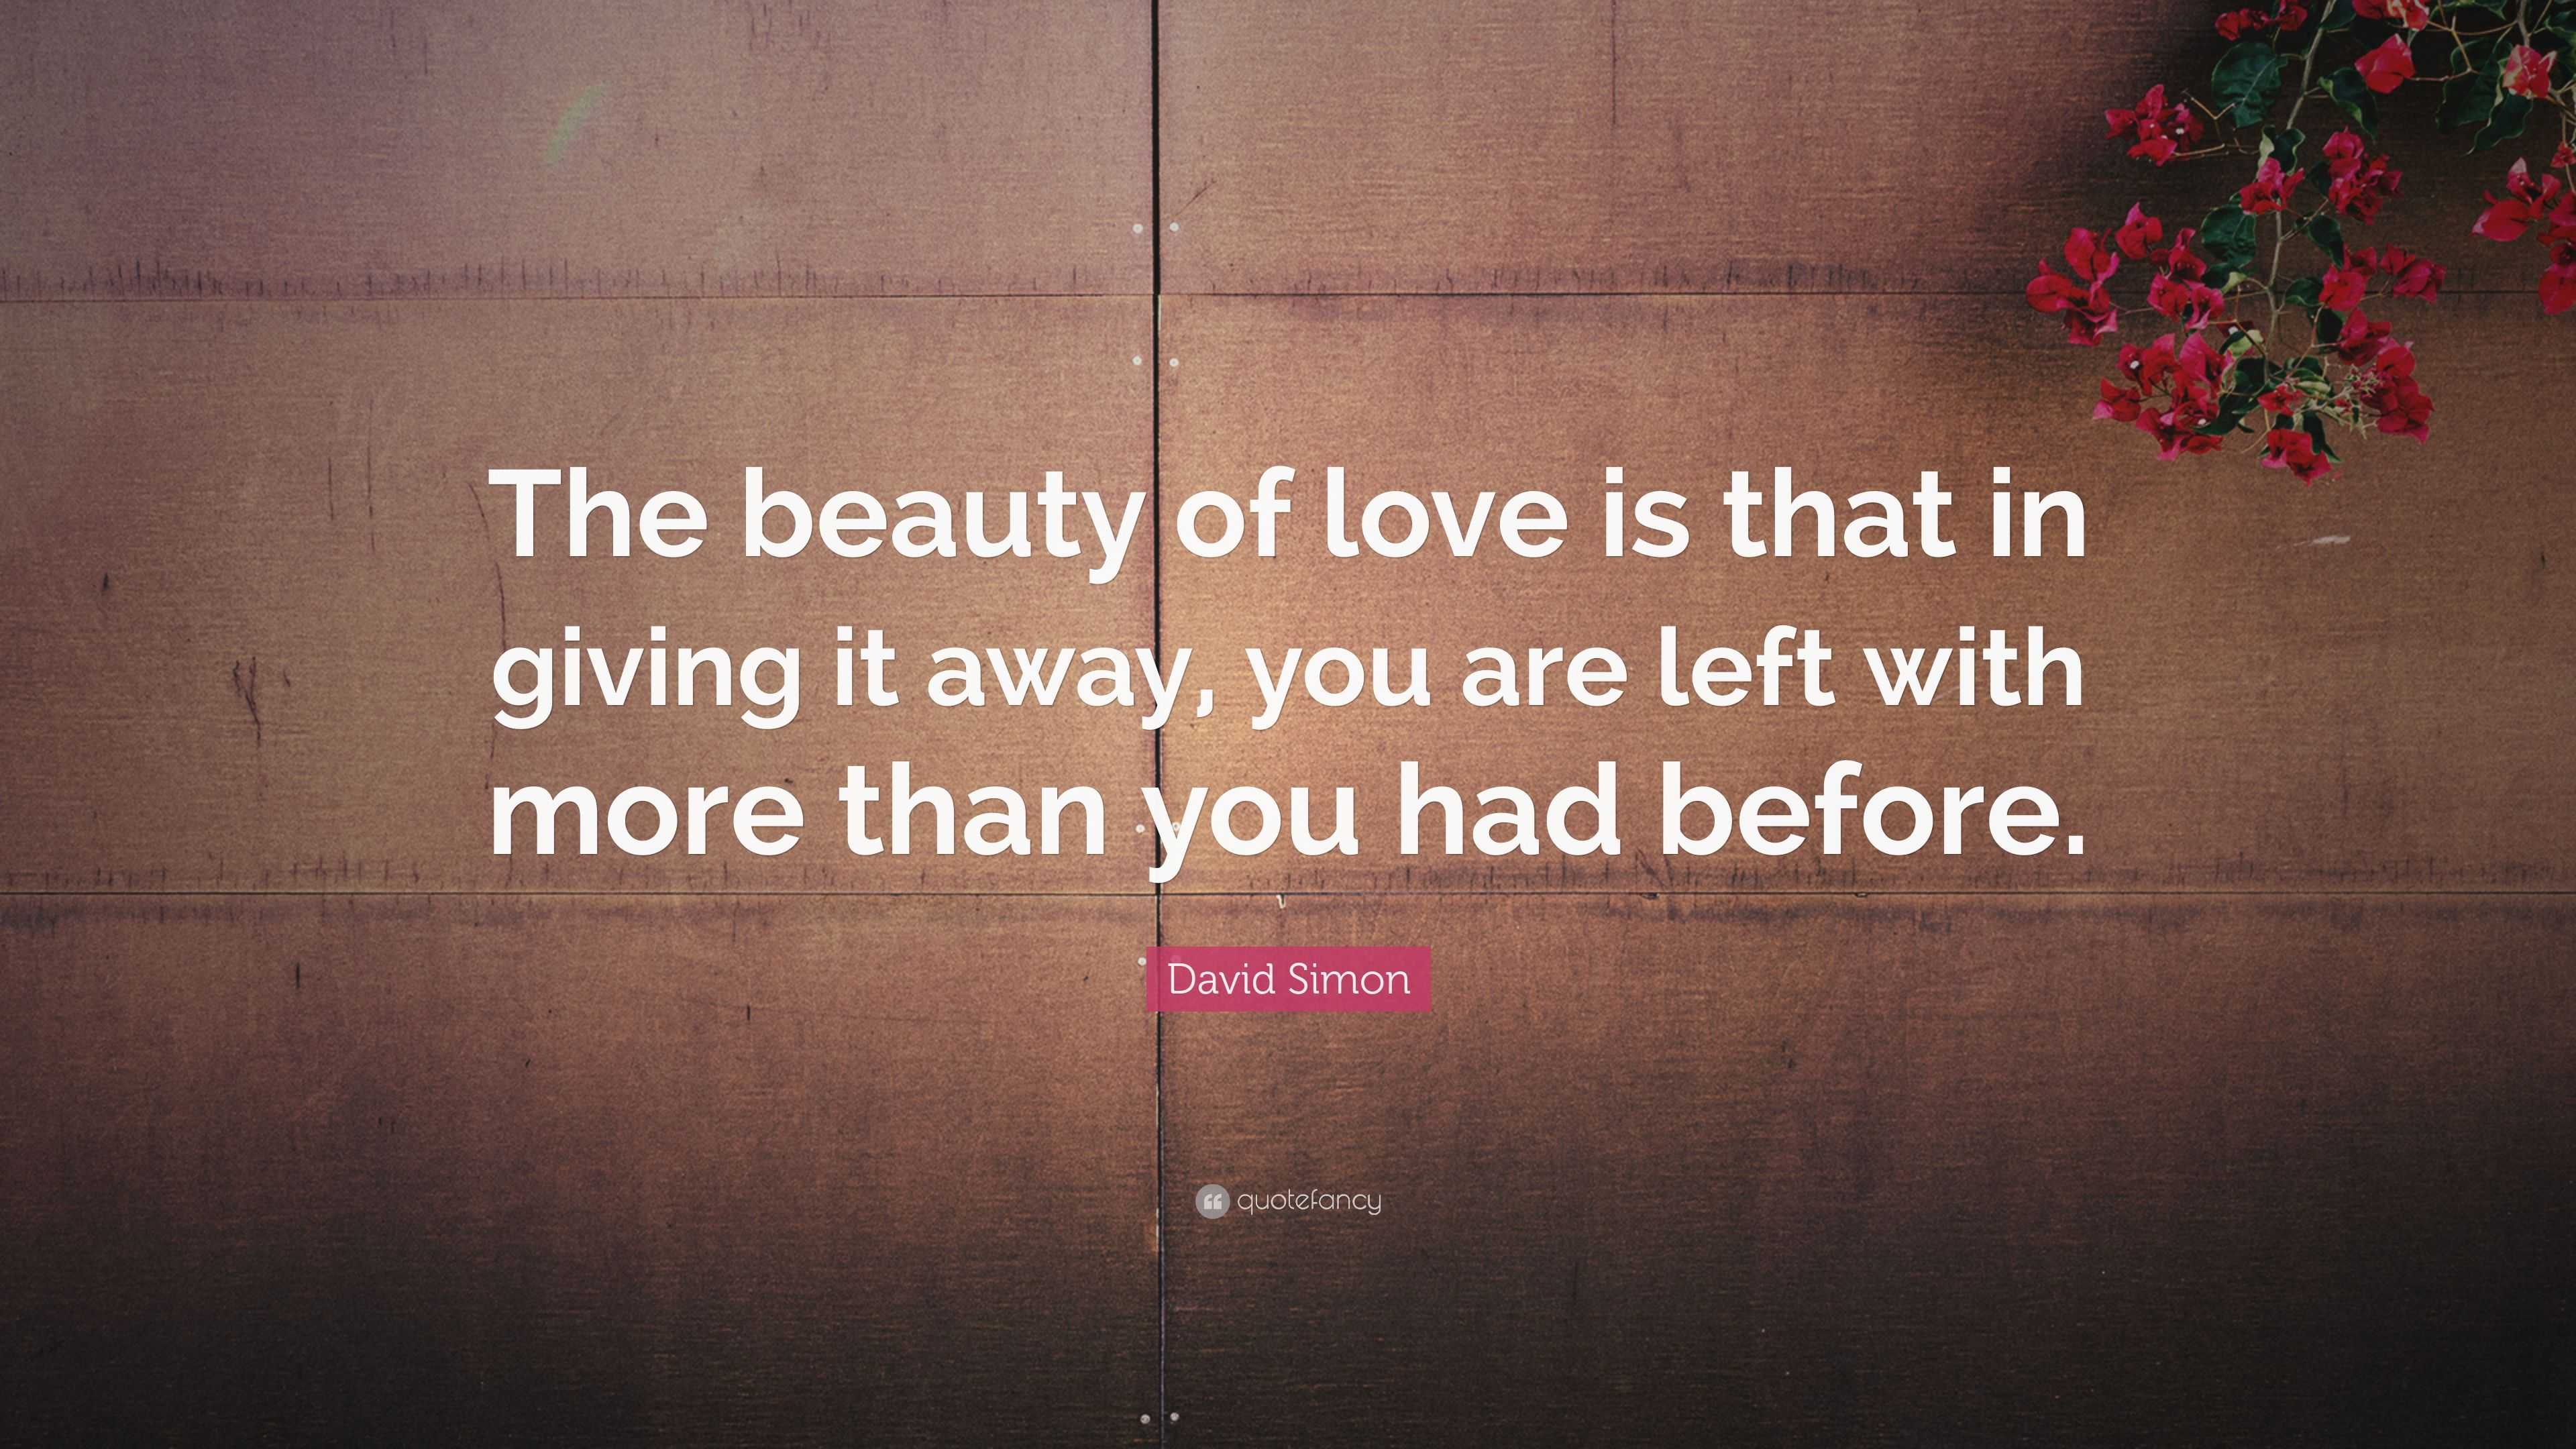 David Simon Quote: “The beauty of love is that in giving it away, you ...